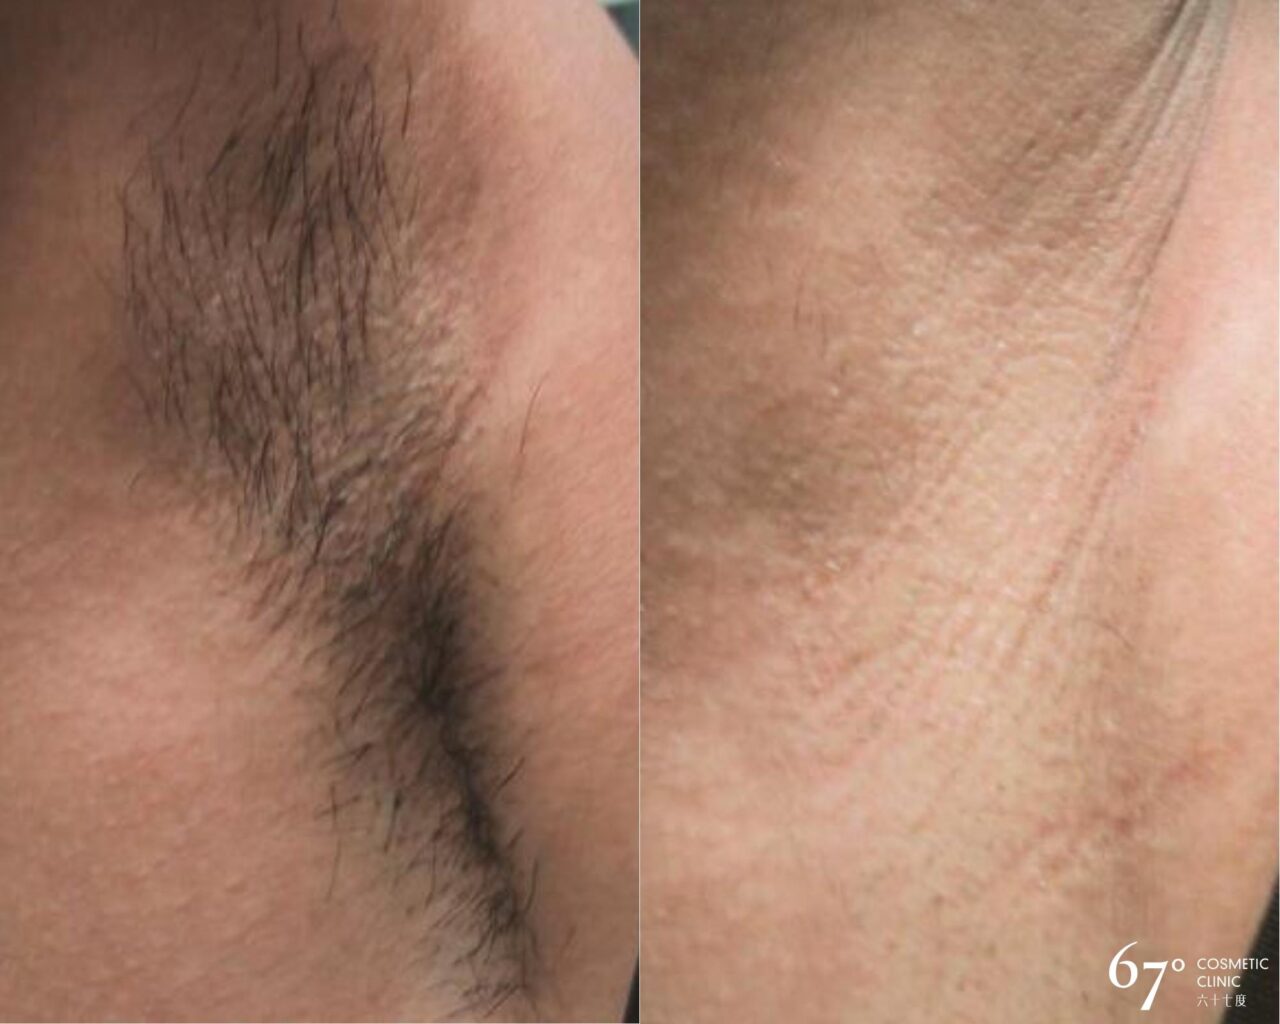 hair removal Vancouver